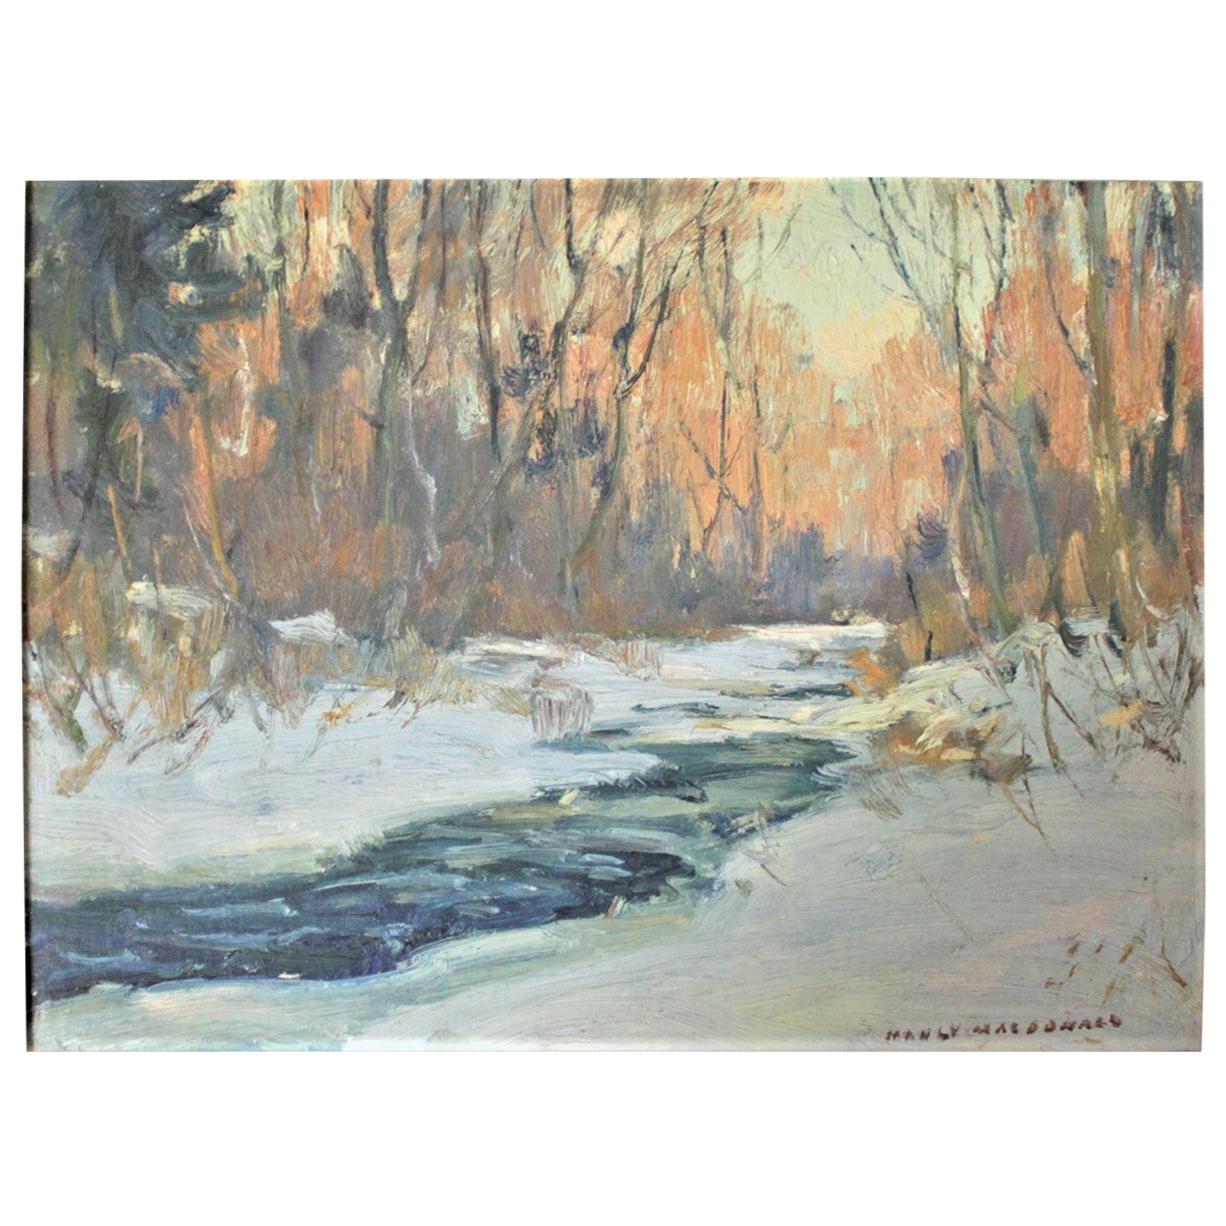 Original Manly E. MacDonald 'Canadian' Oil on Canvas Board Landscape Painting